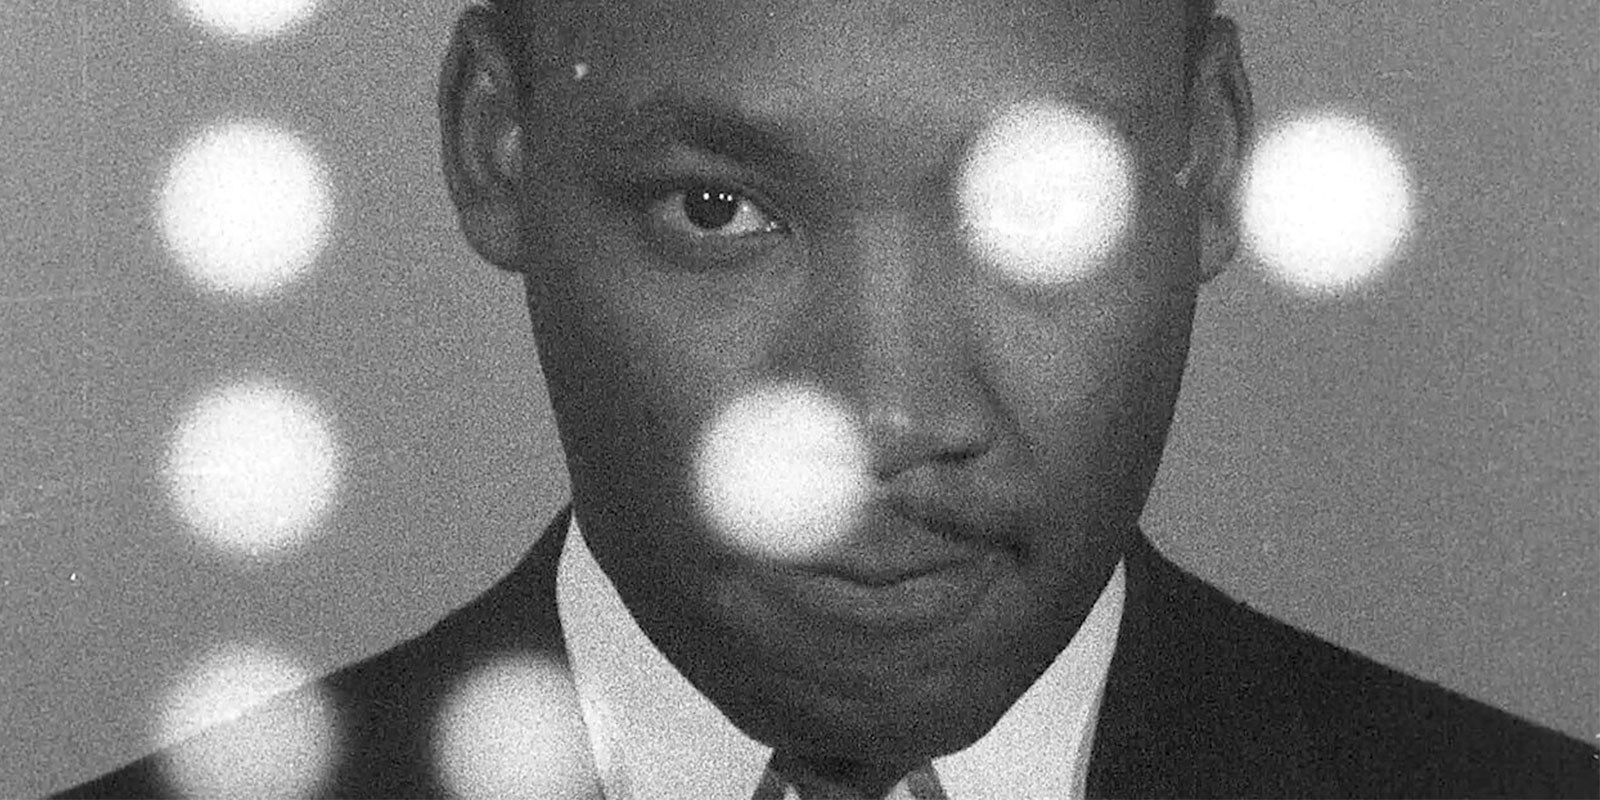 Black and white image of Martin Luther King, Jr. looking directly at the camera.